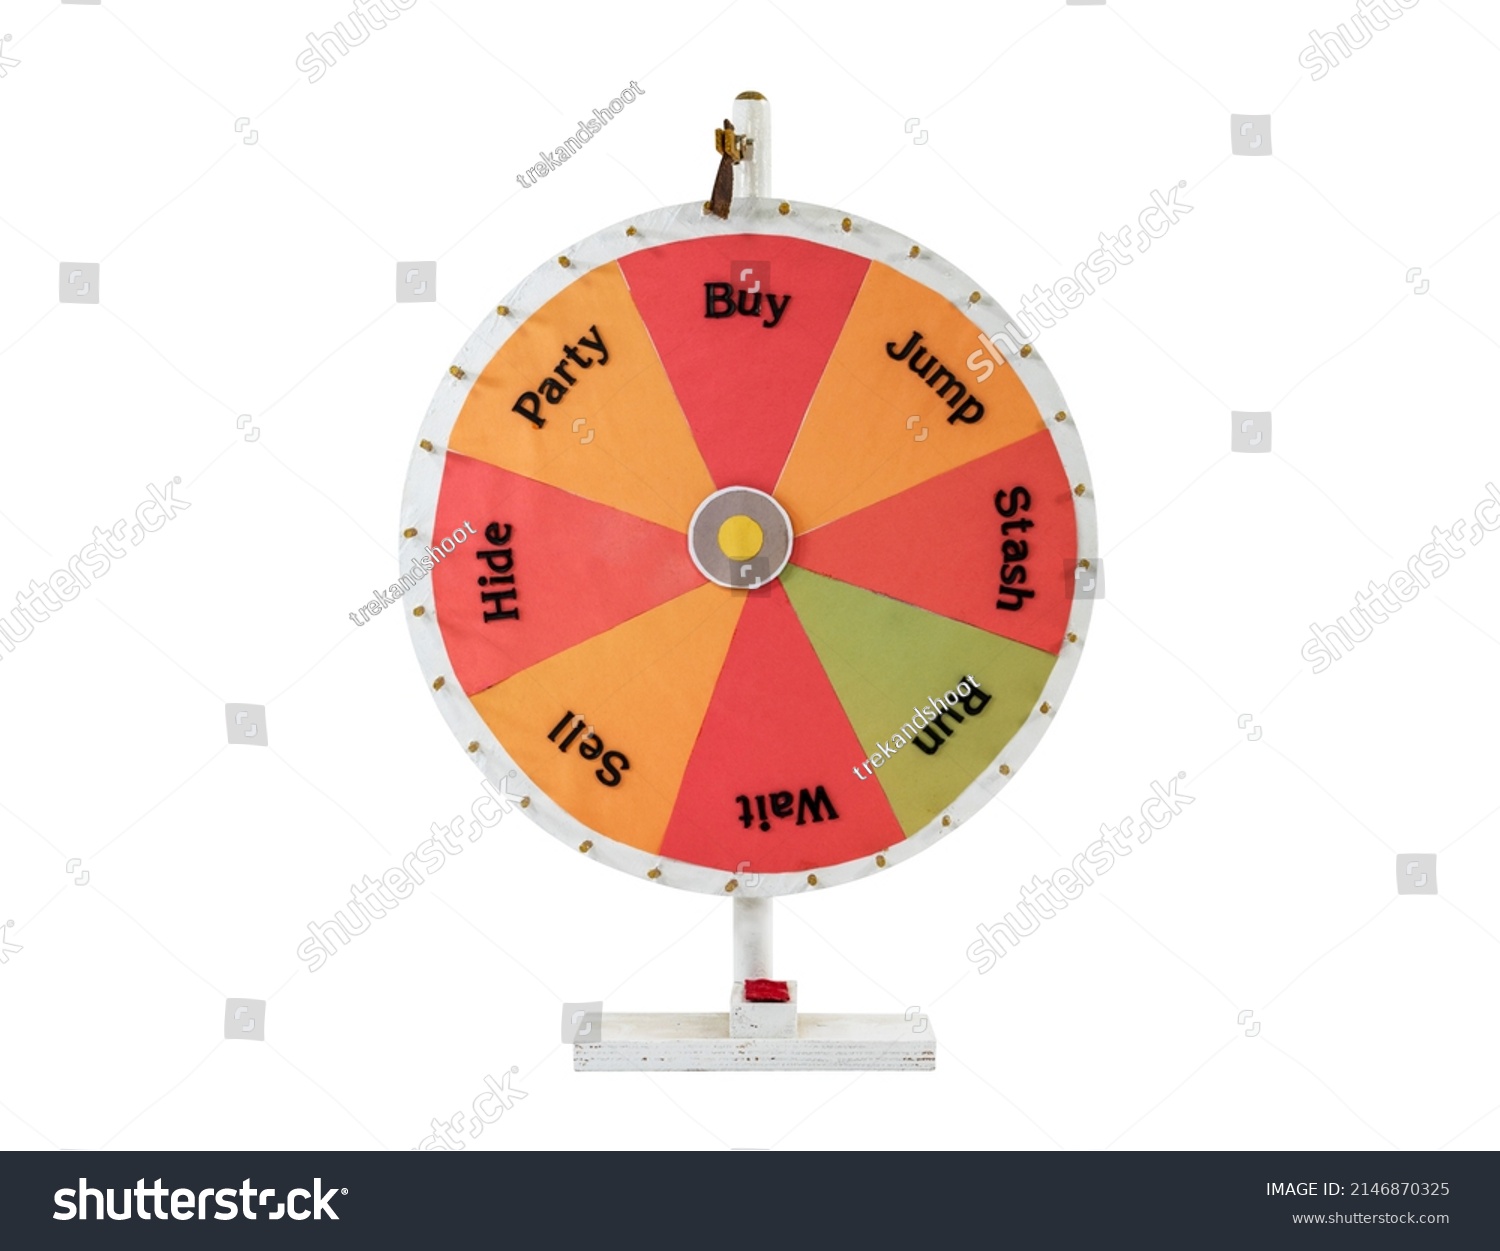 Home made financial advisor investment routlete spin wheel. #2146870325